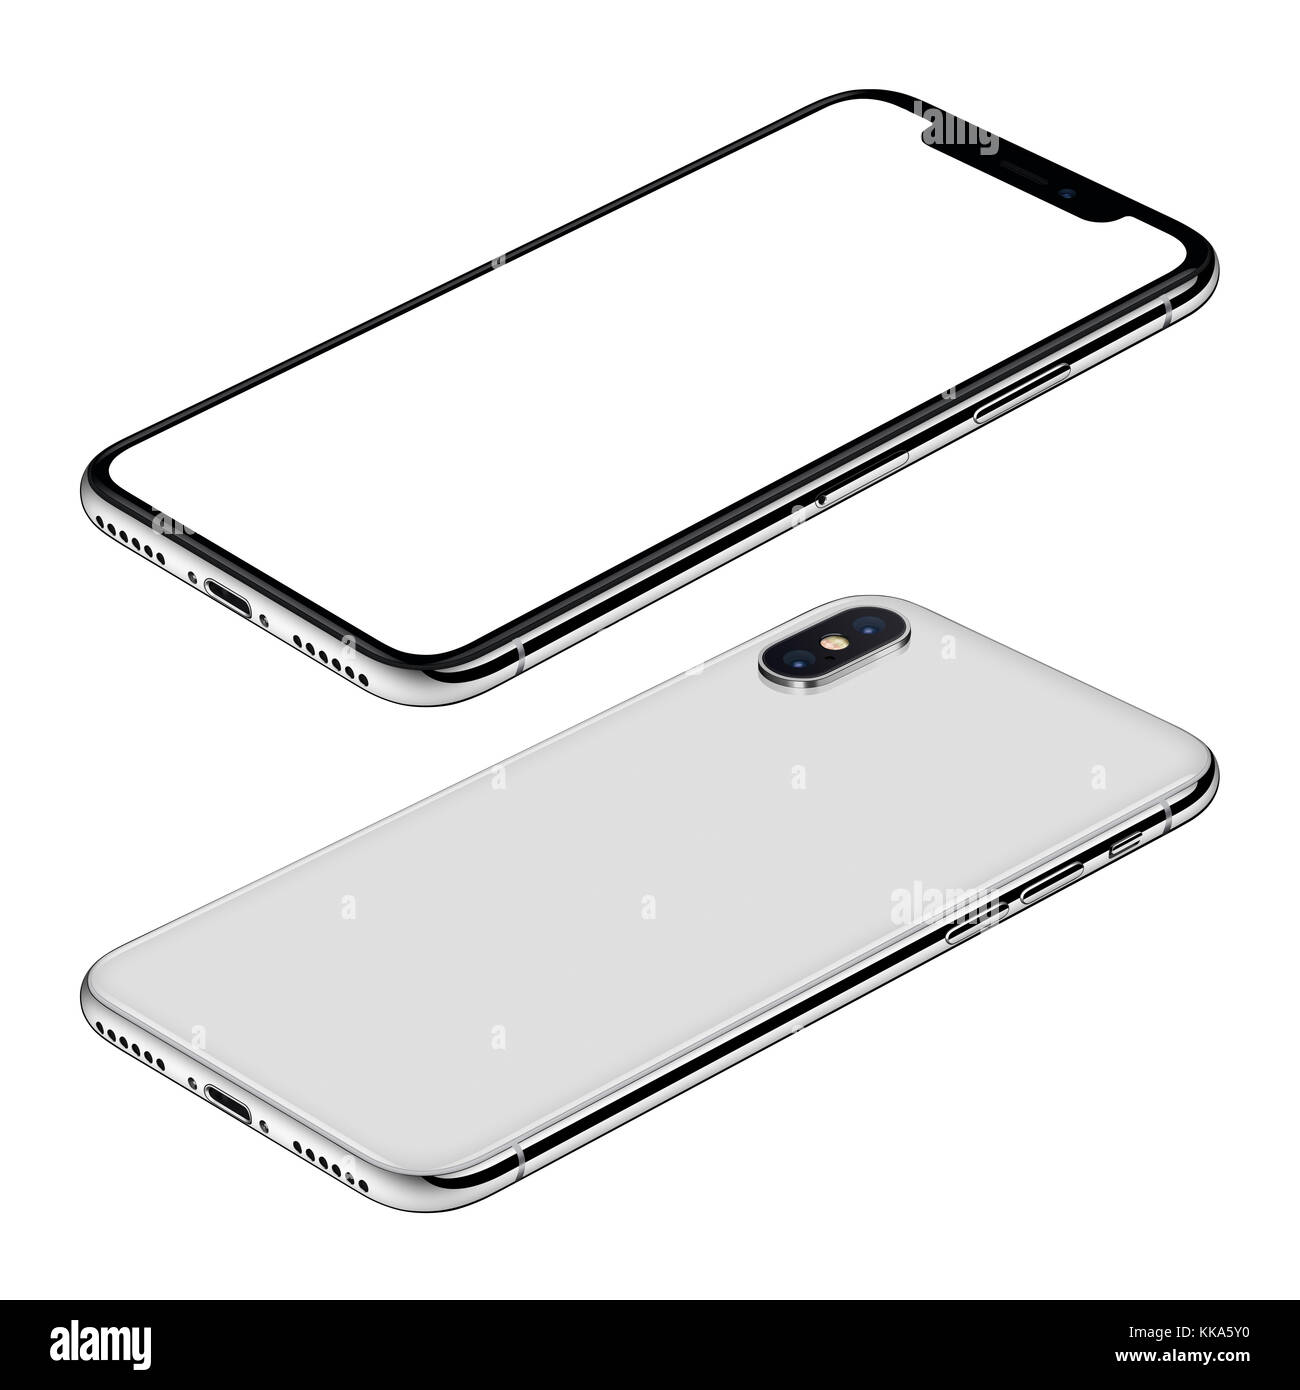 White smartphone mockup similar to iPhone X front and back sides isometric view CW rotated lies on surface. Stock Photo